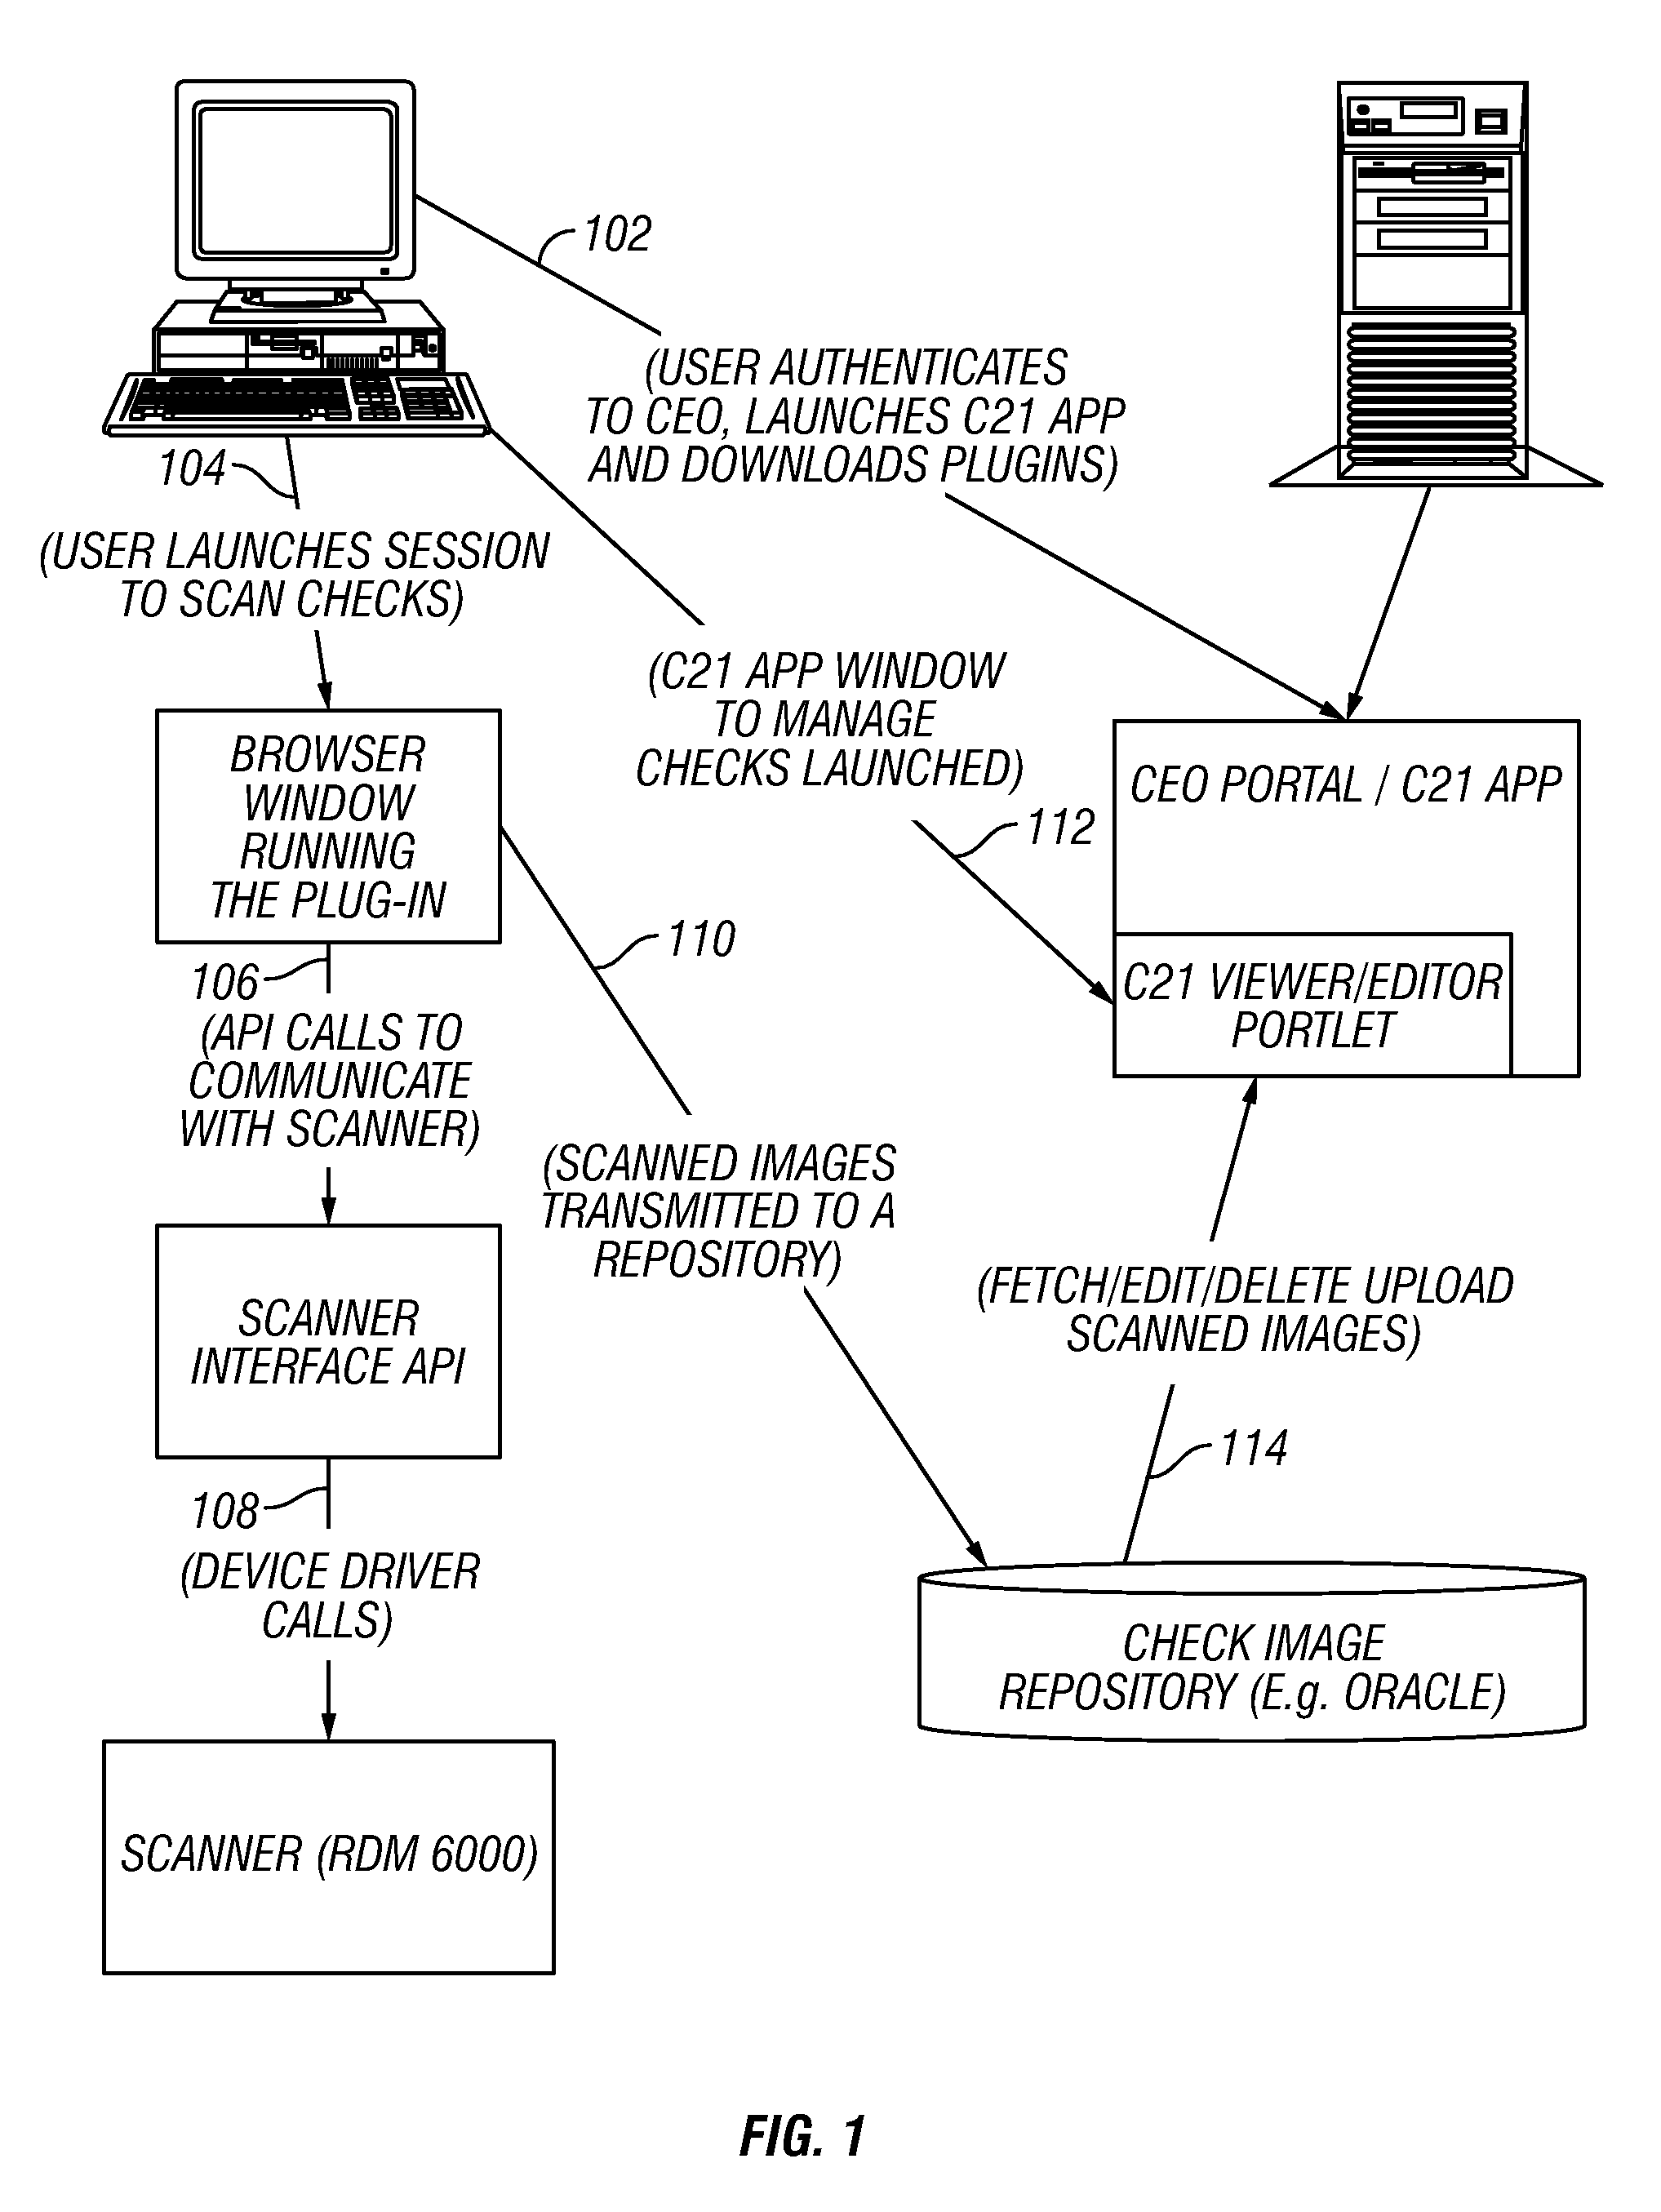 Method and apparatus for accepting check deposits via the internet using browser-based technology